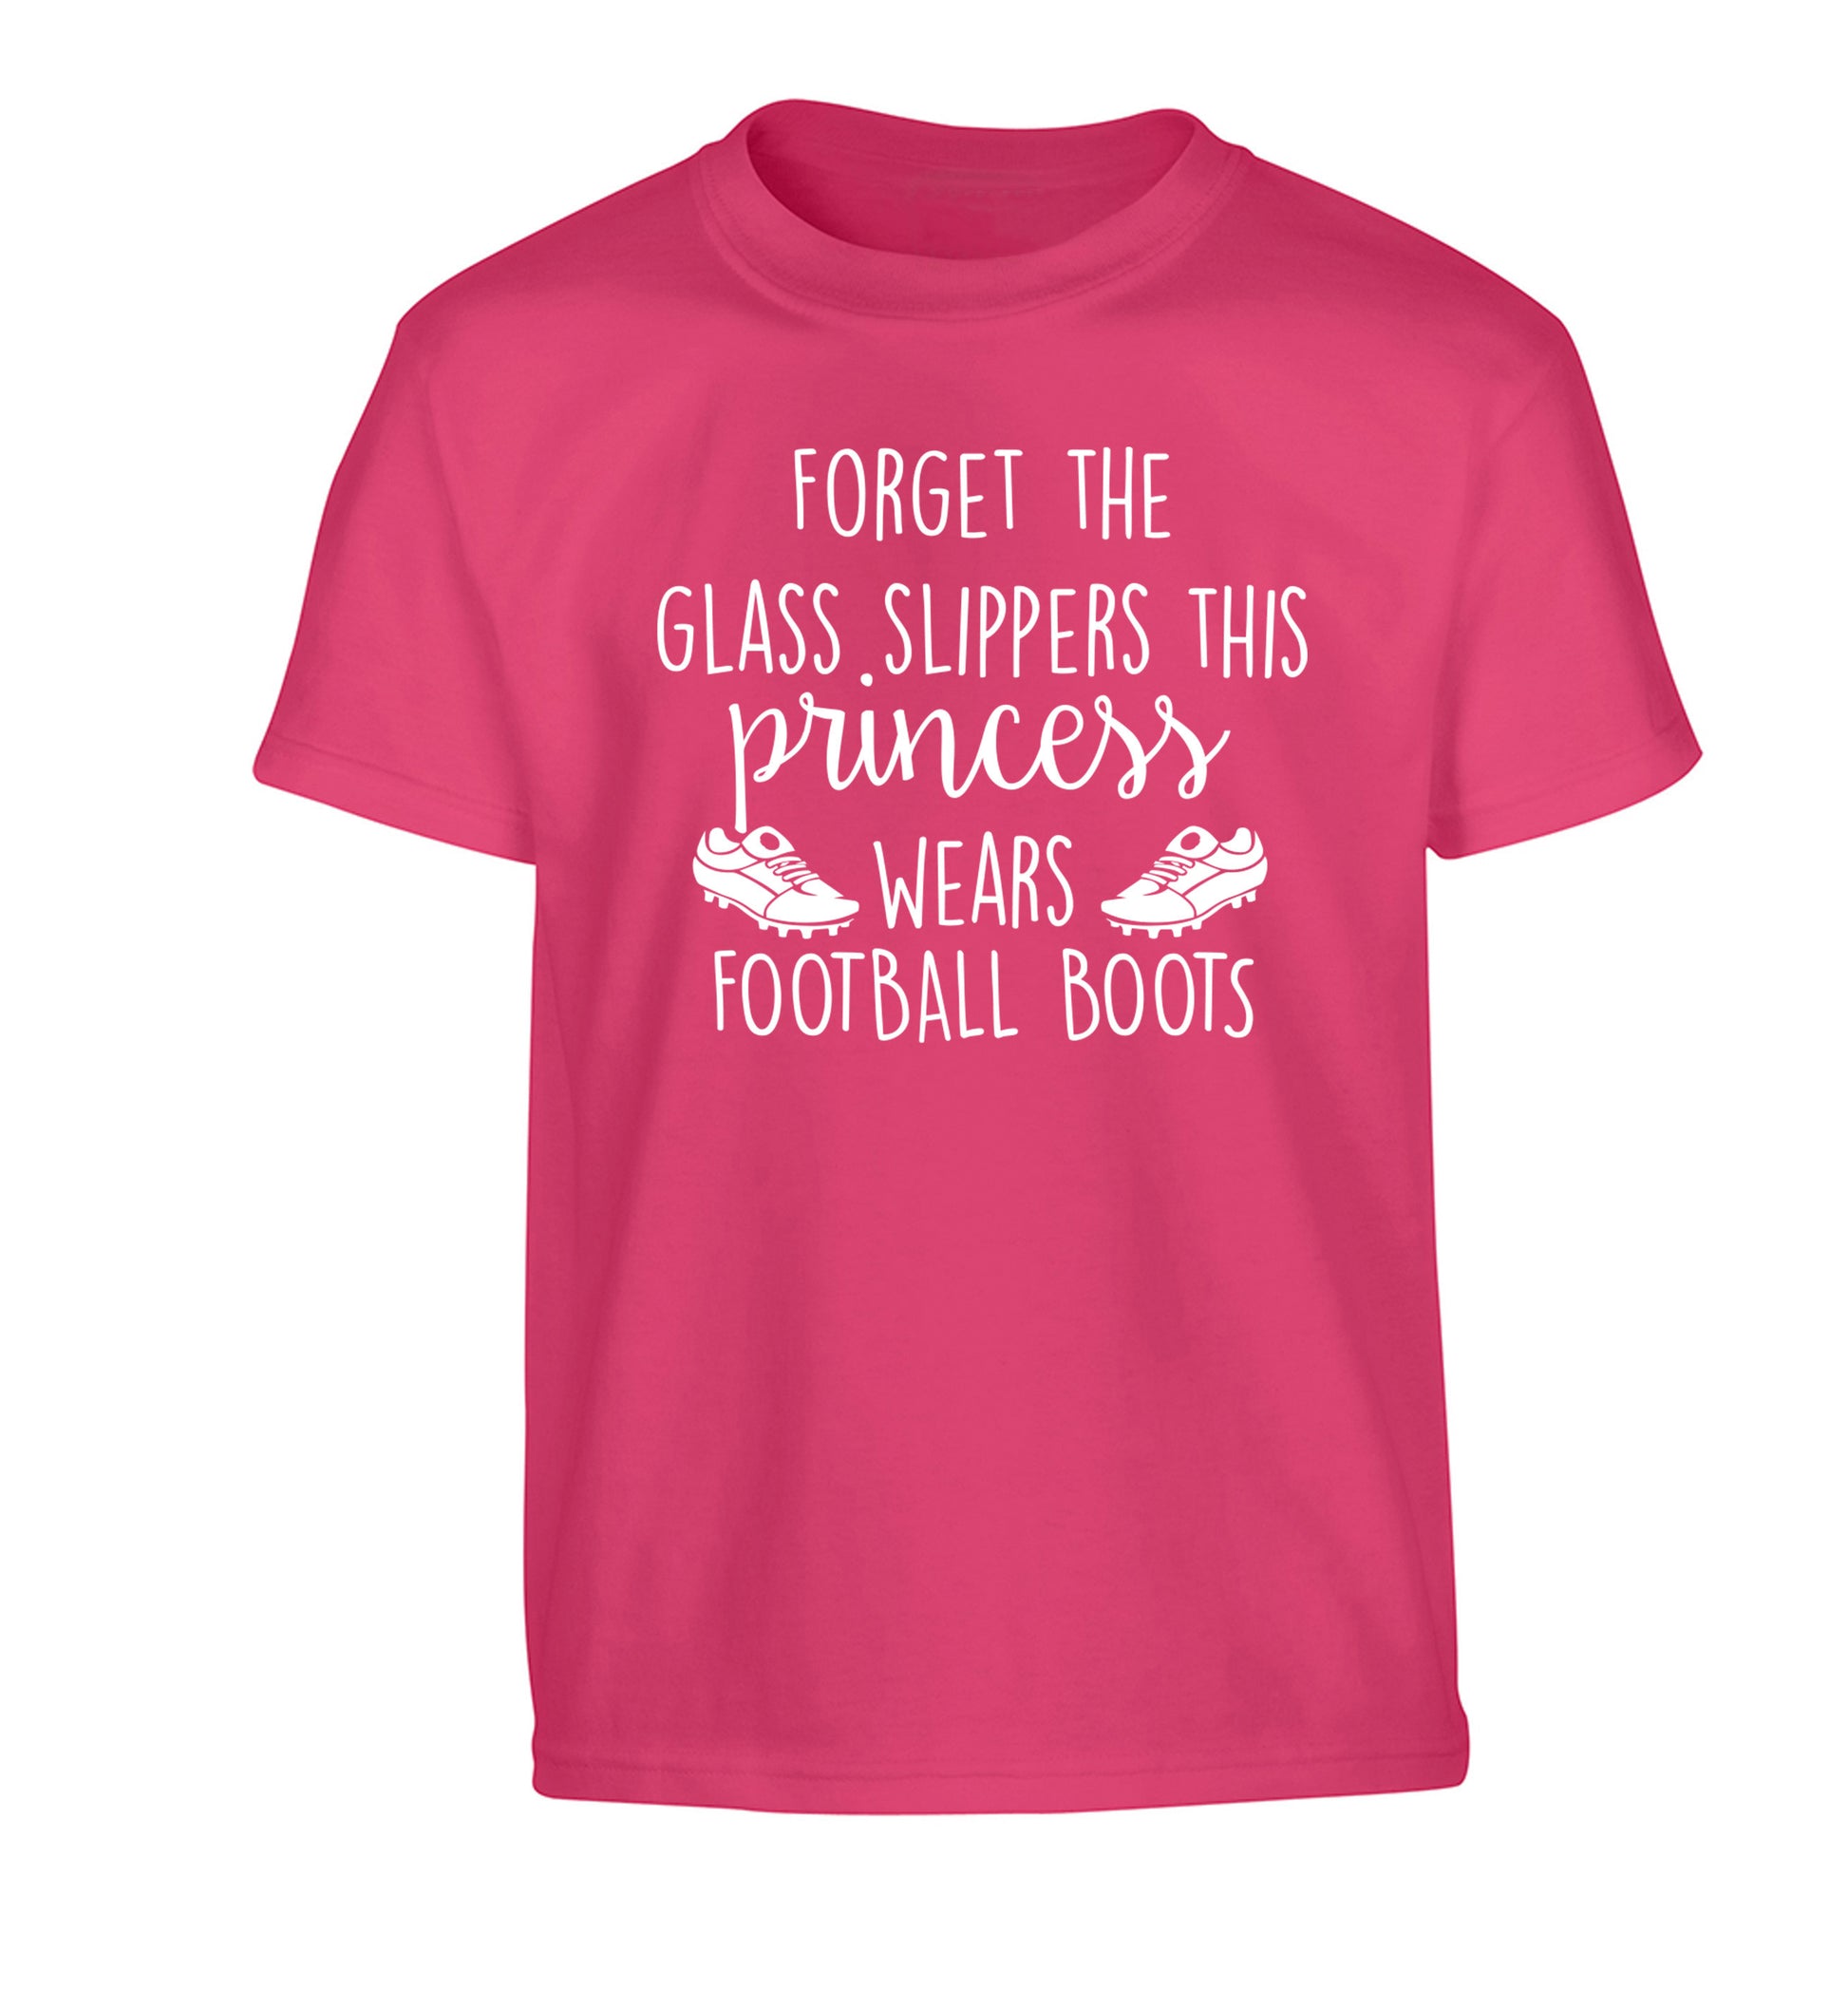 Forget the glass slippers this princess wears football boots Children's pink Tshirt 12-14 Years